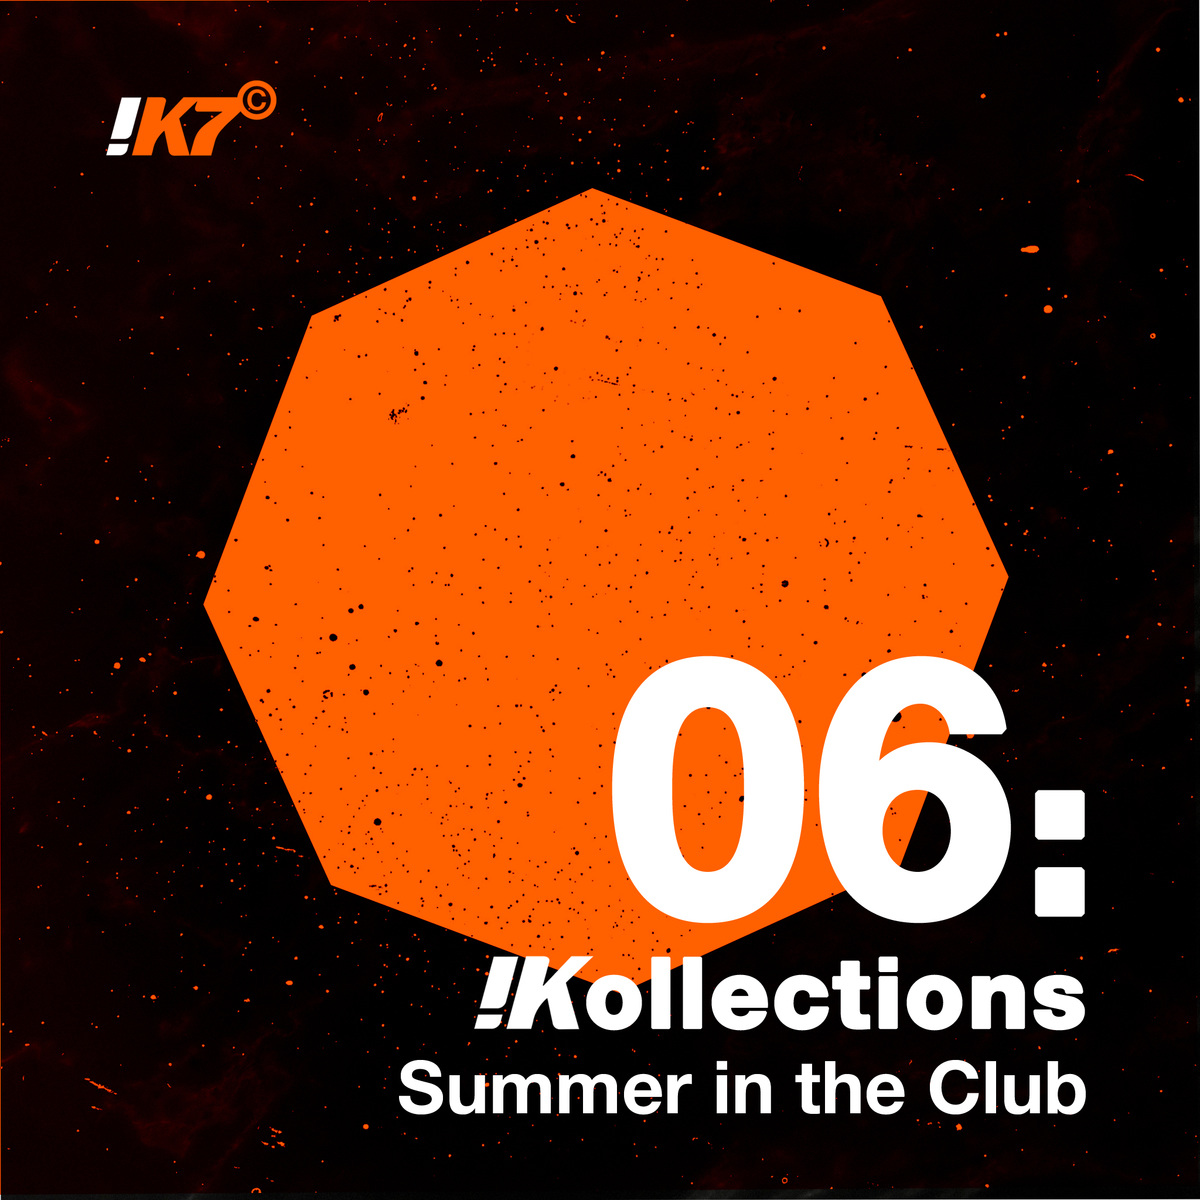 VA - !Kollections 06: Summer in the Club / !K7 Records